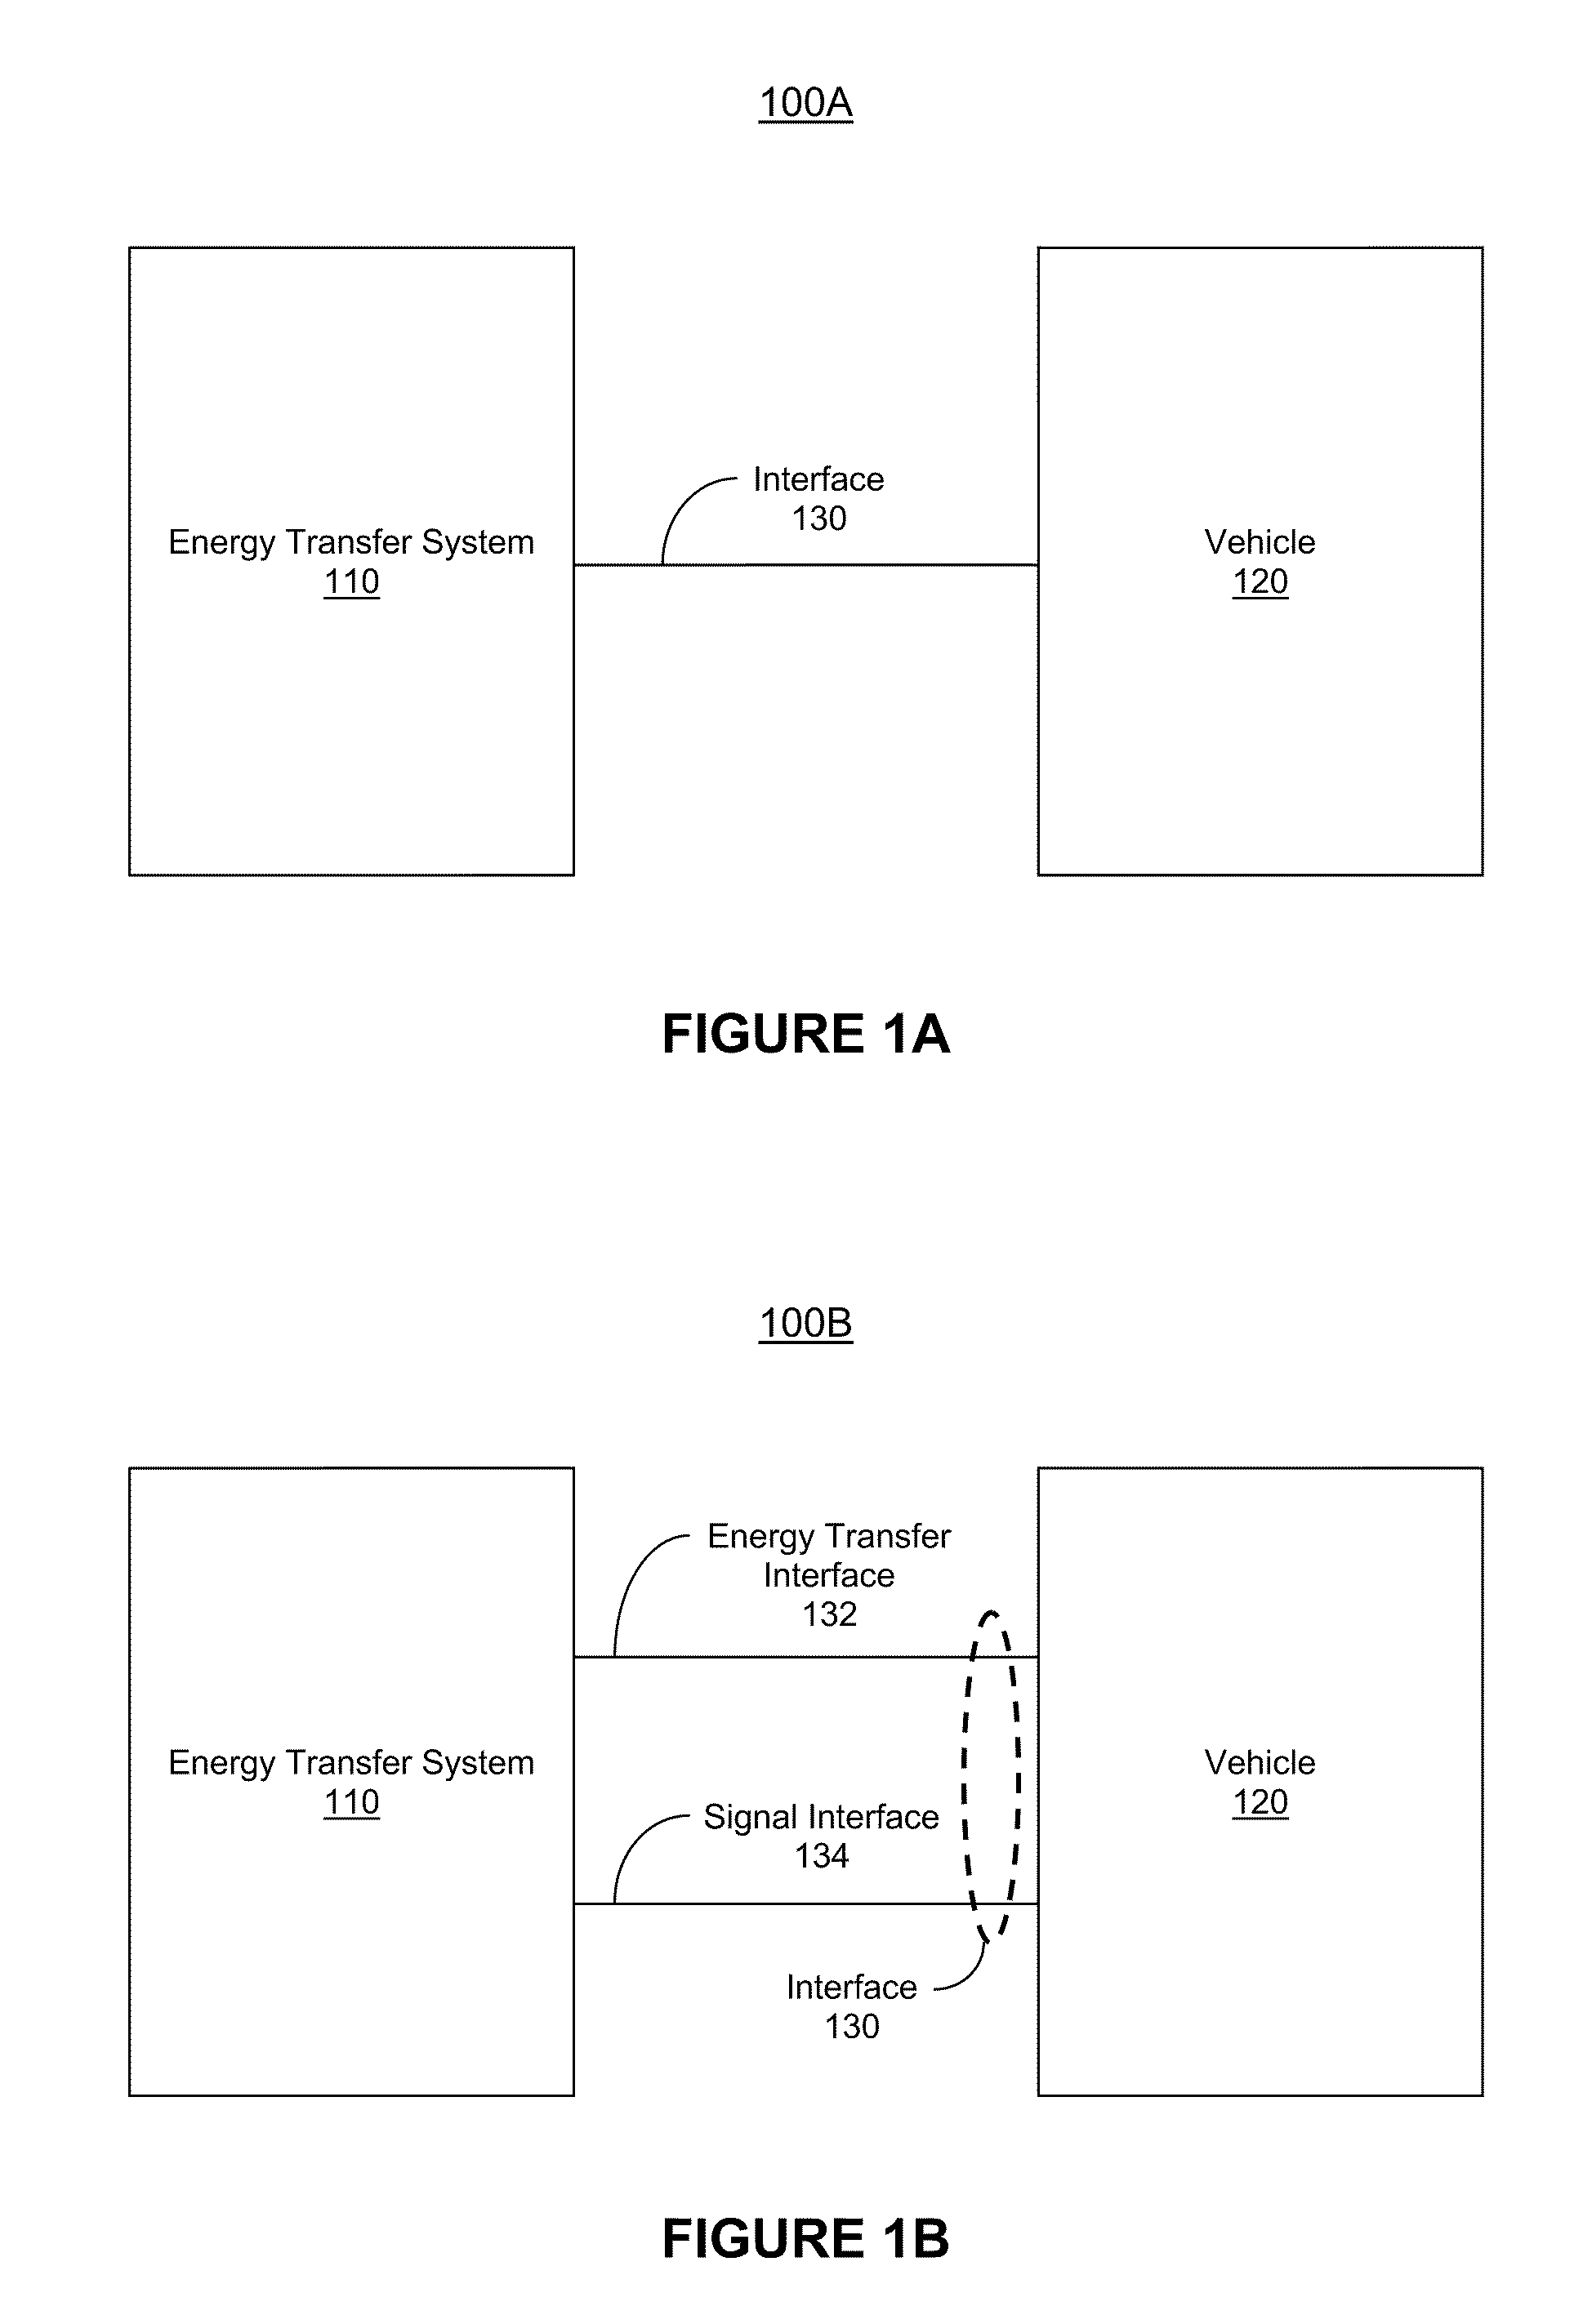 Managing an energy transfer between a vehicle and an energy transfer system